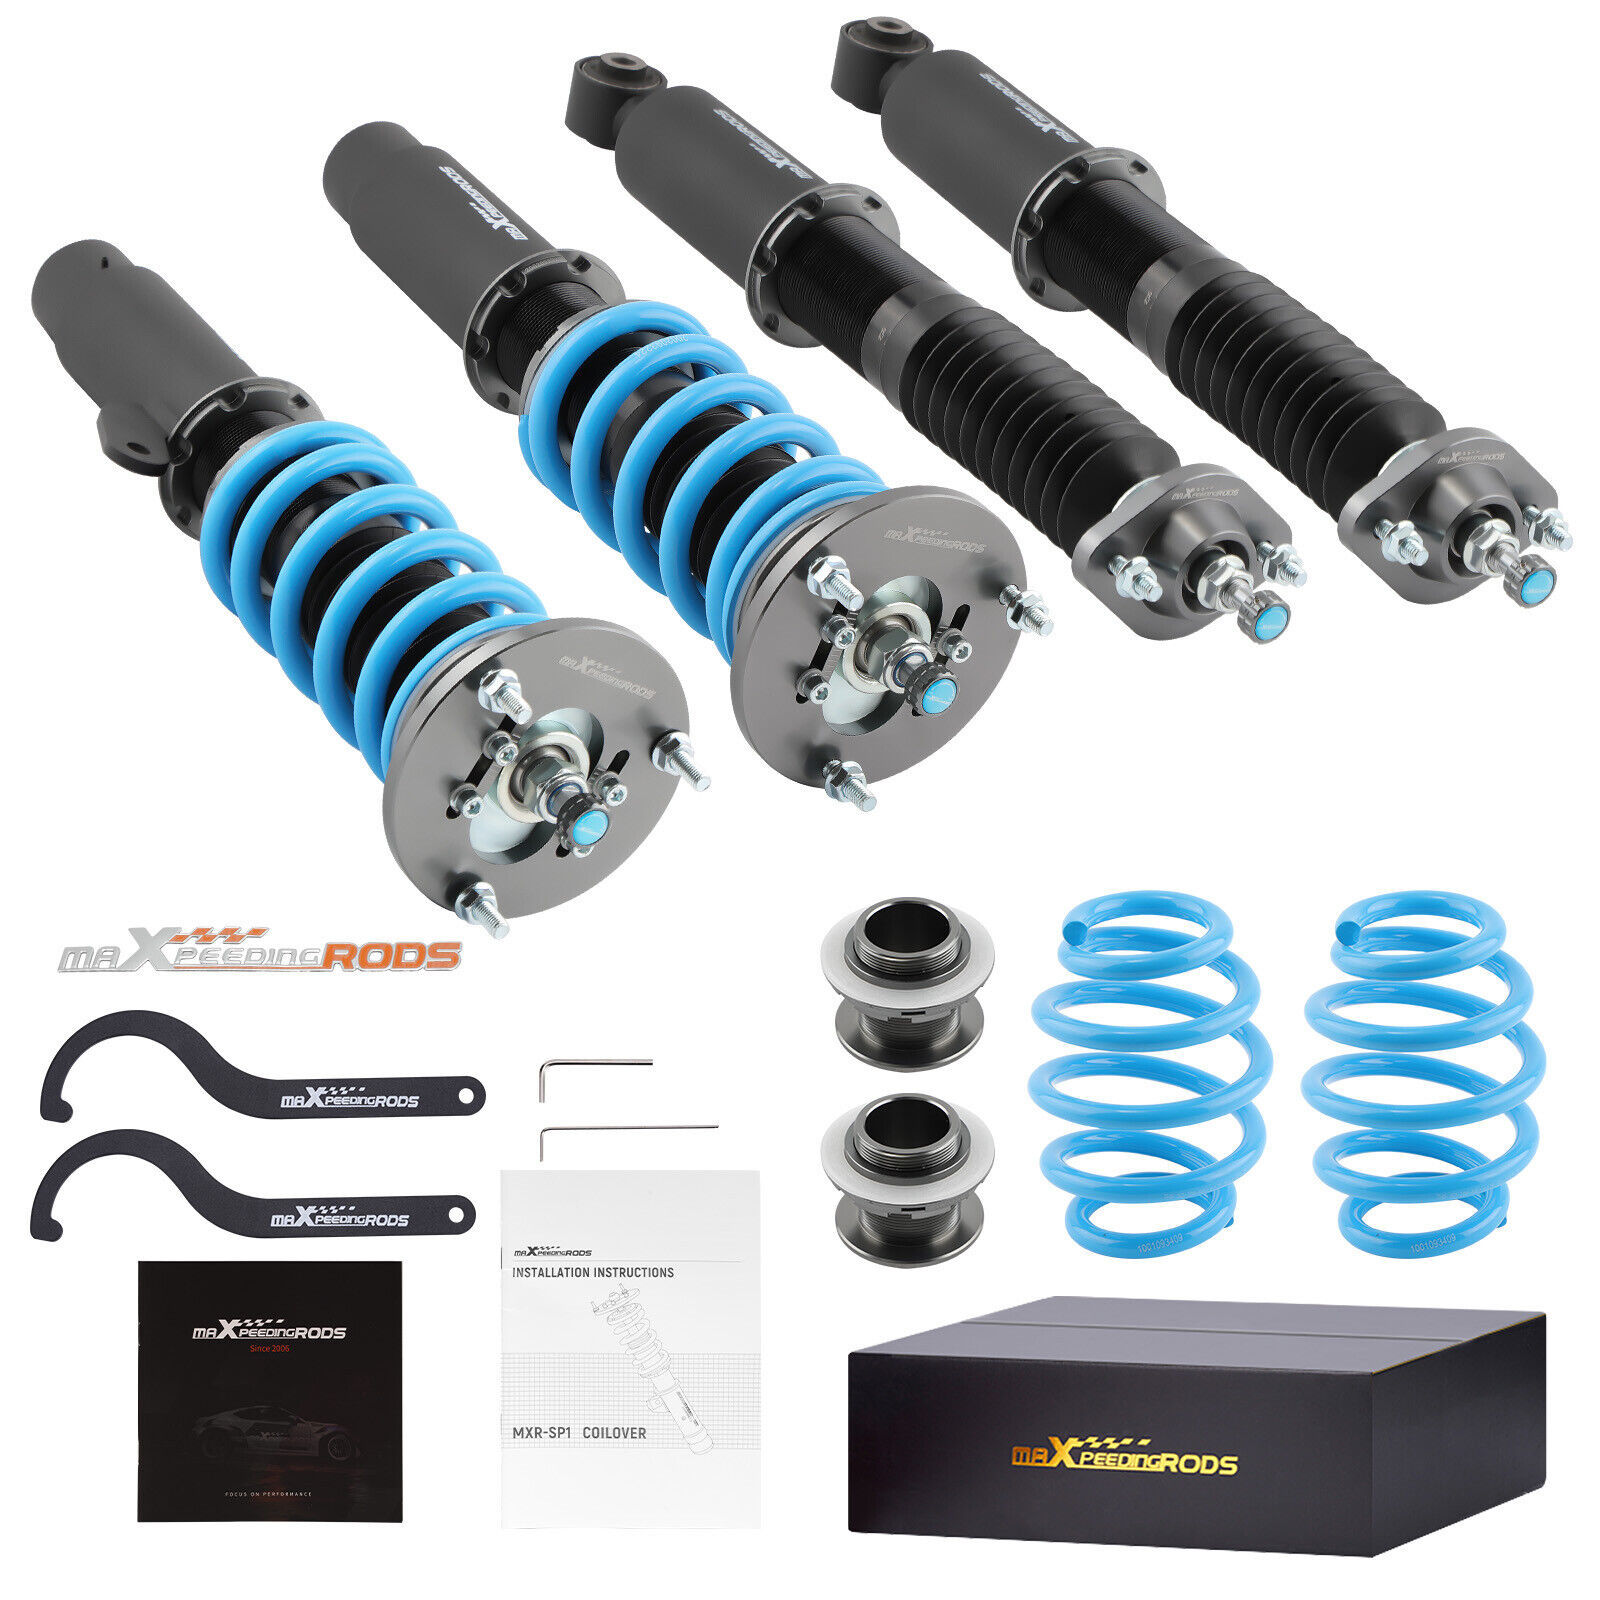 Maxpeedingrods COT6 Coilover Suspension Kit For BMW E46 RWD 323 325 328 320 RWD - $395.01